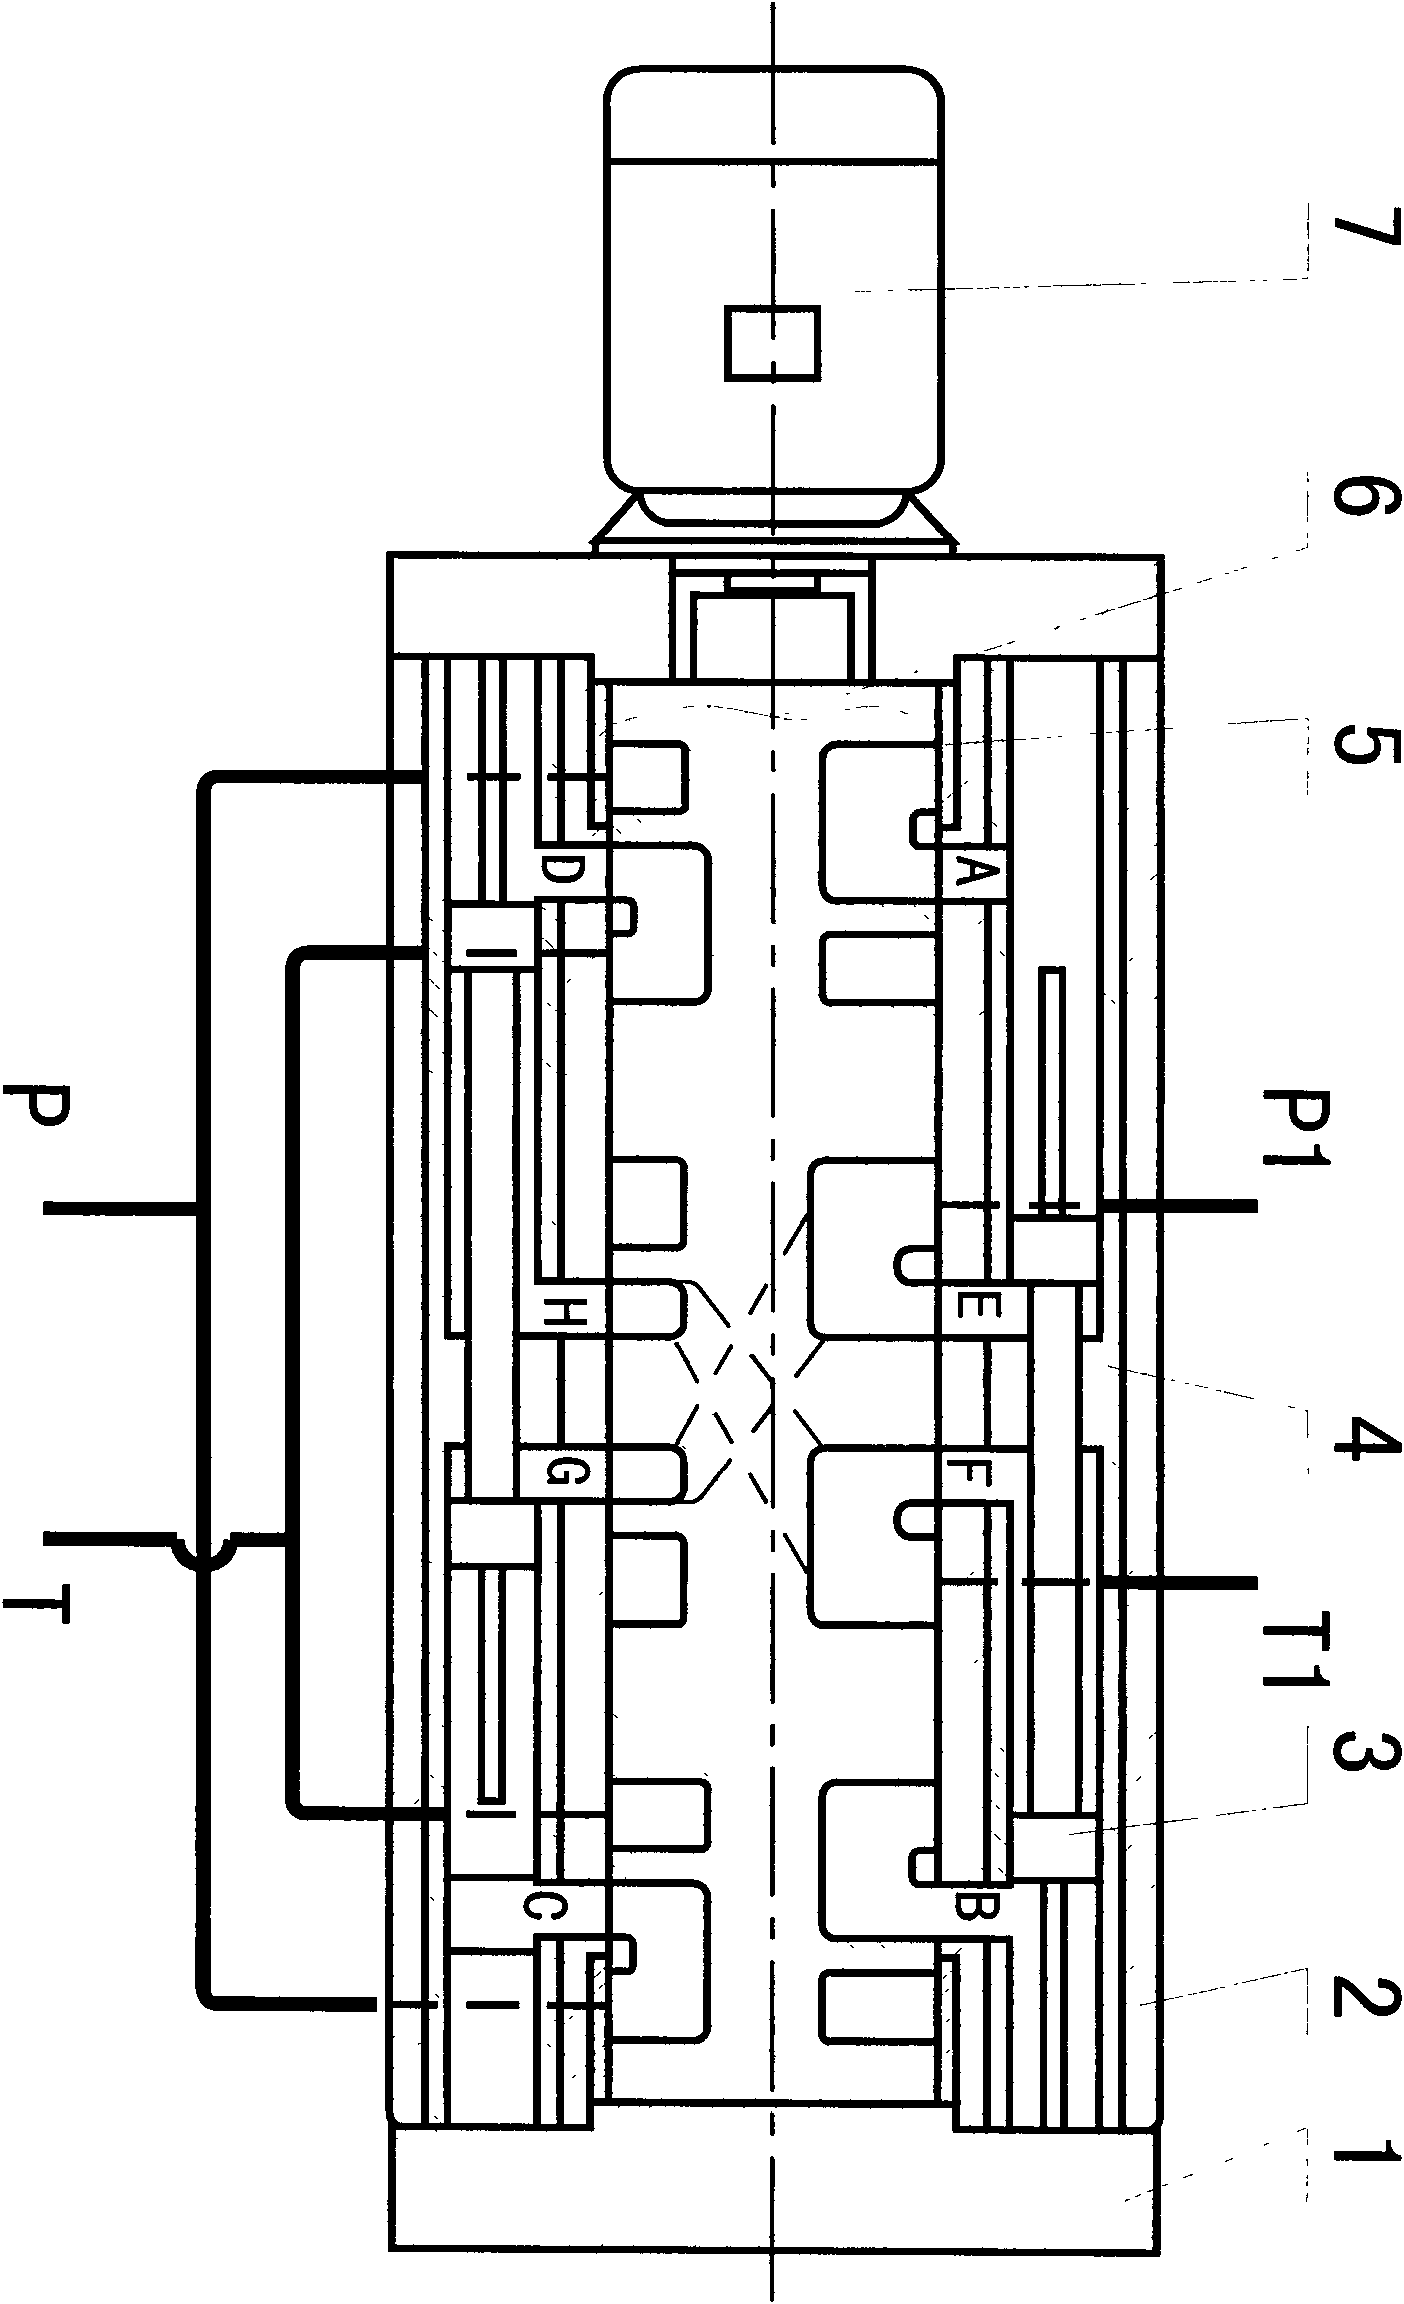 Positive displacement liquid pressure energy recovery device